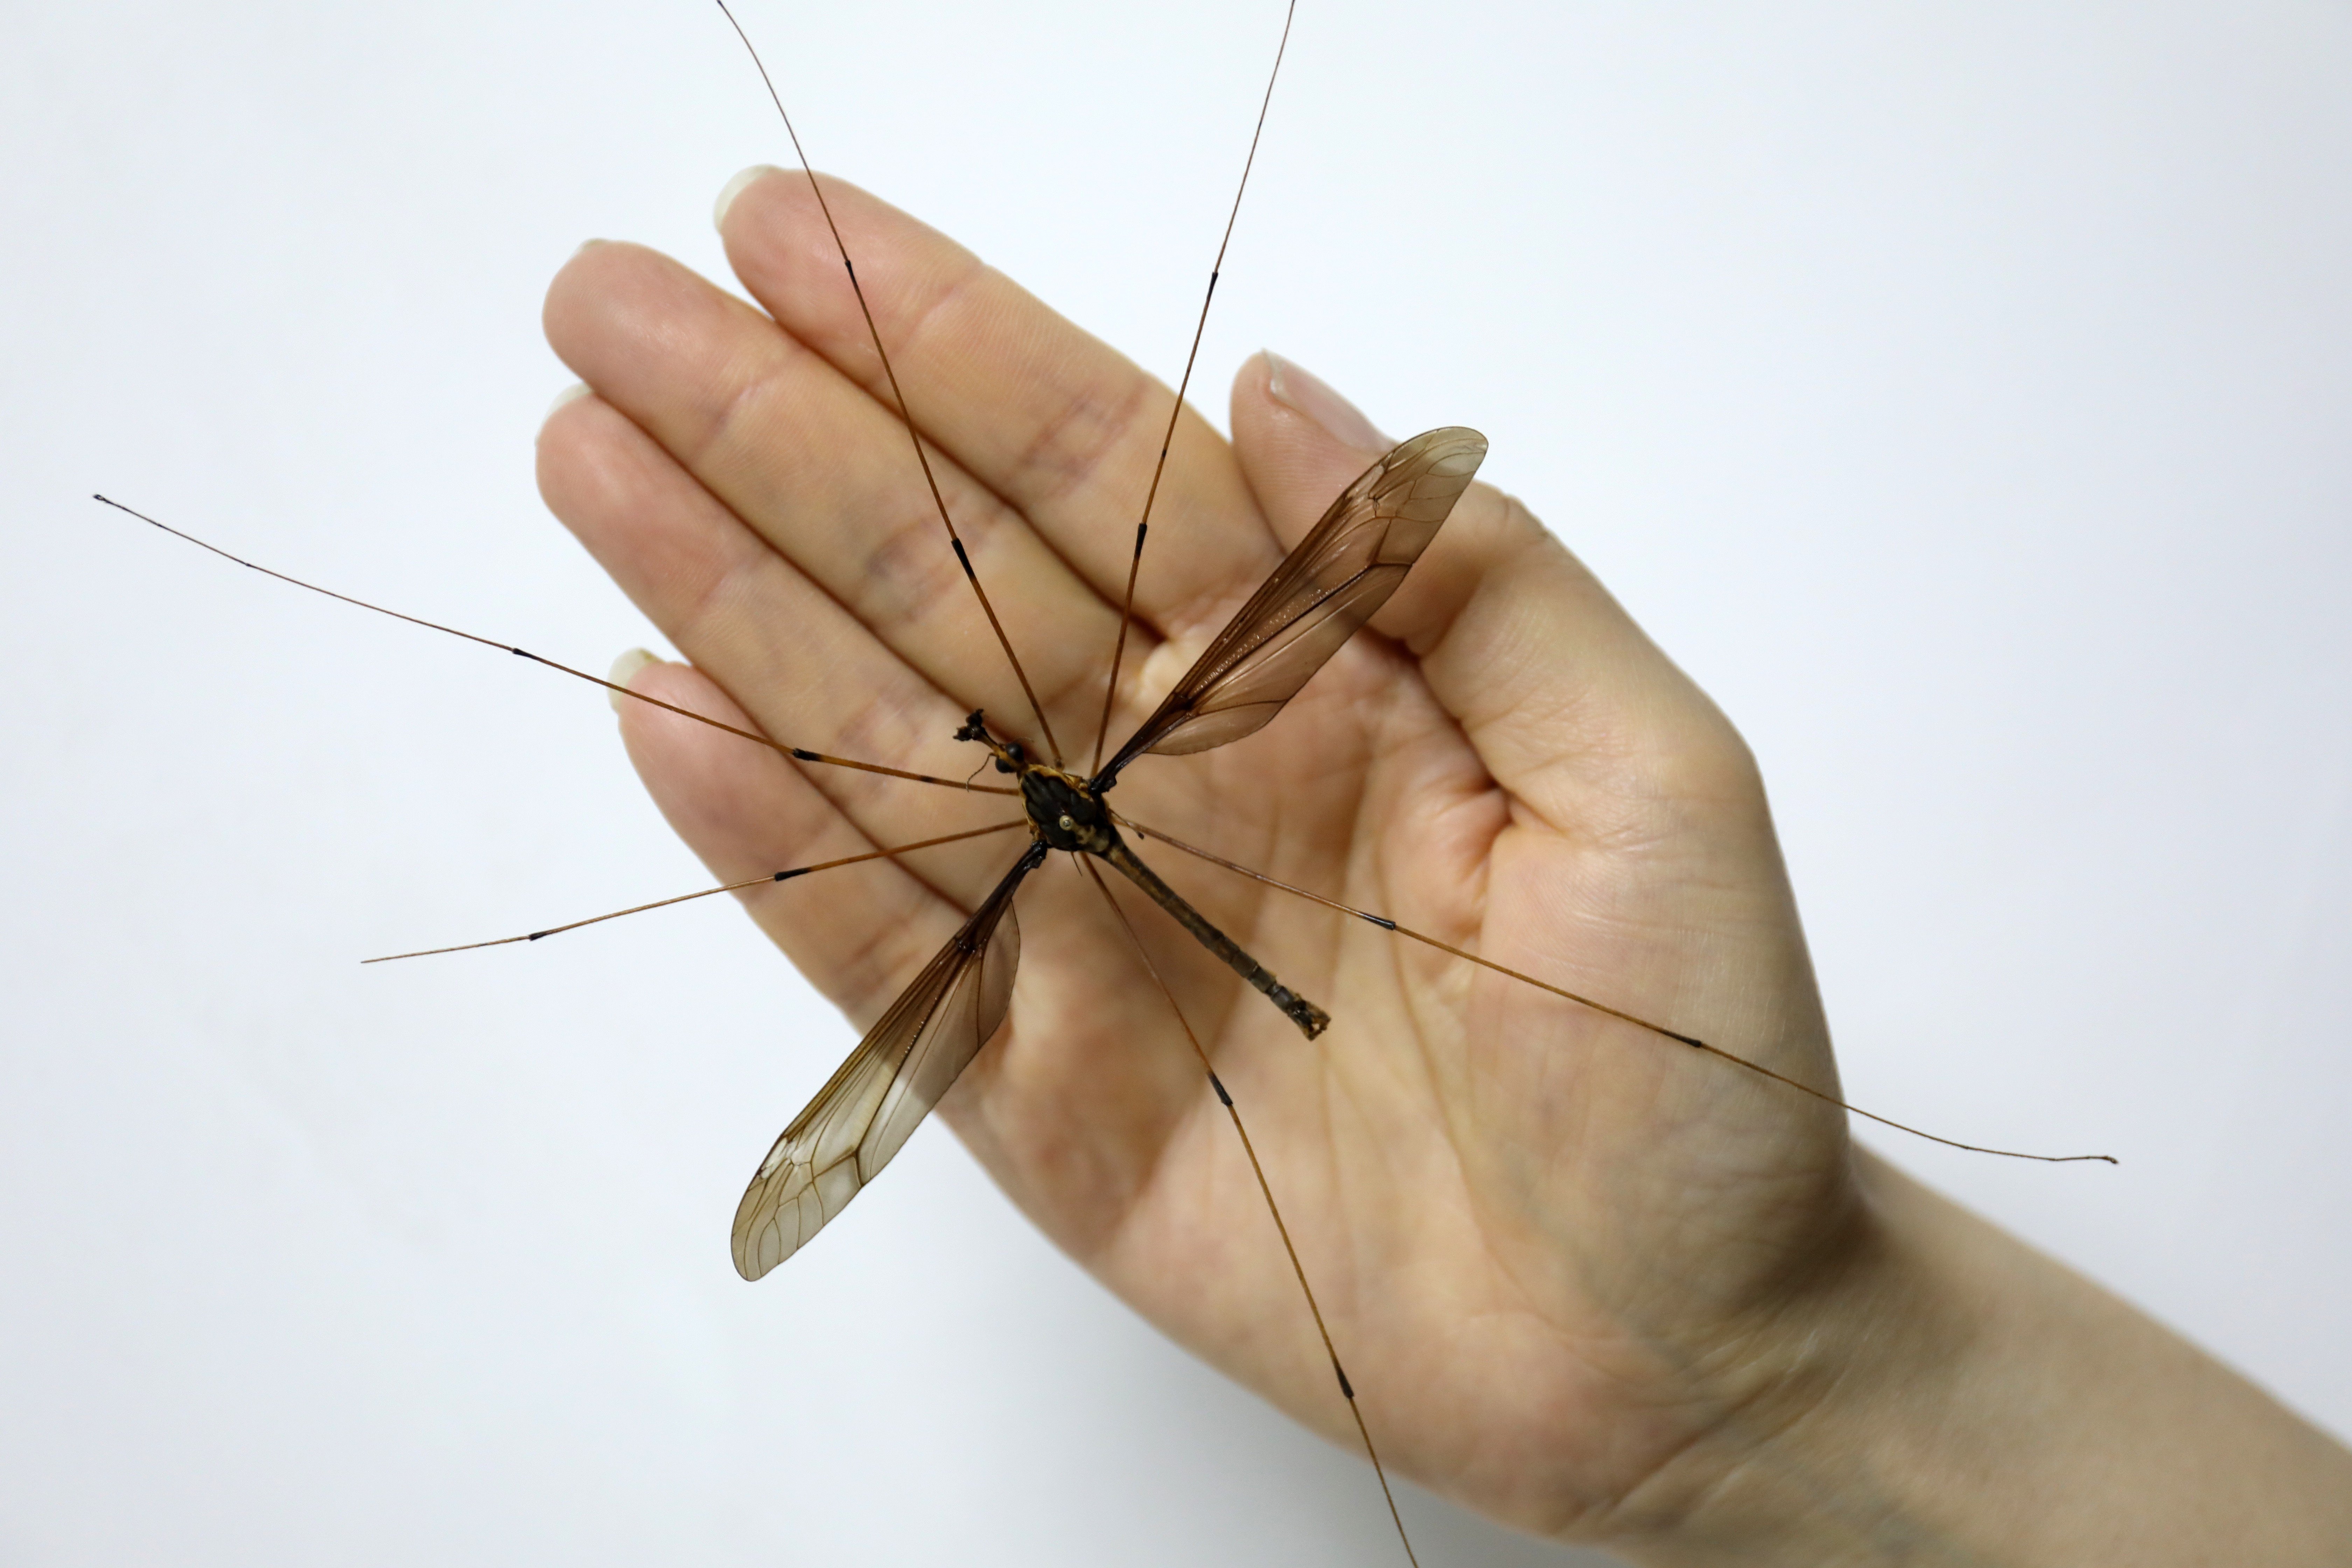 How many biggest mosquitoes are there in the world?